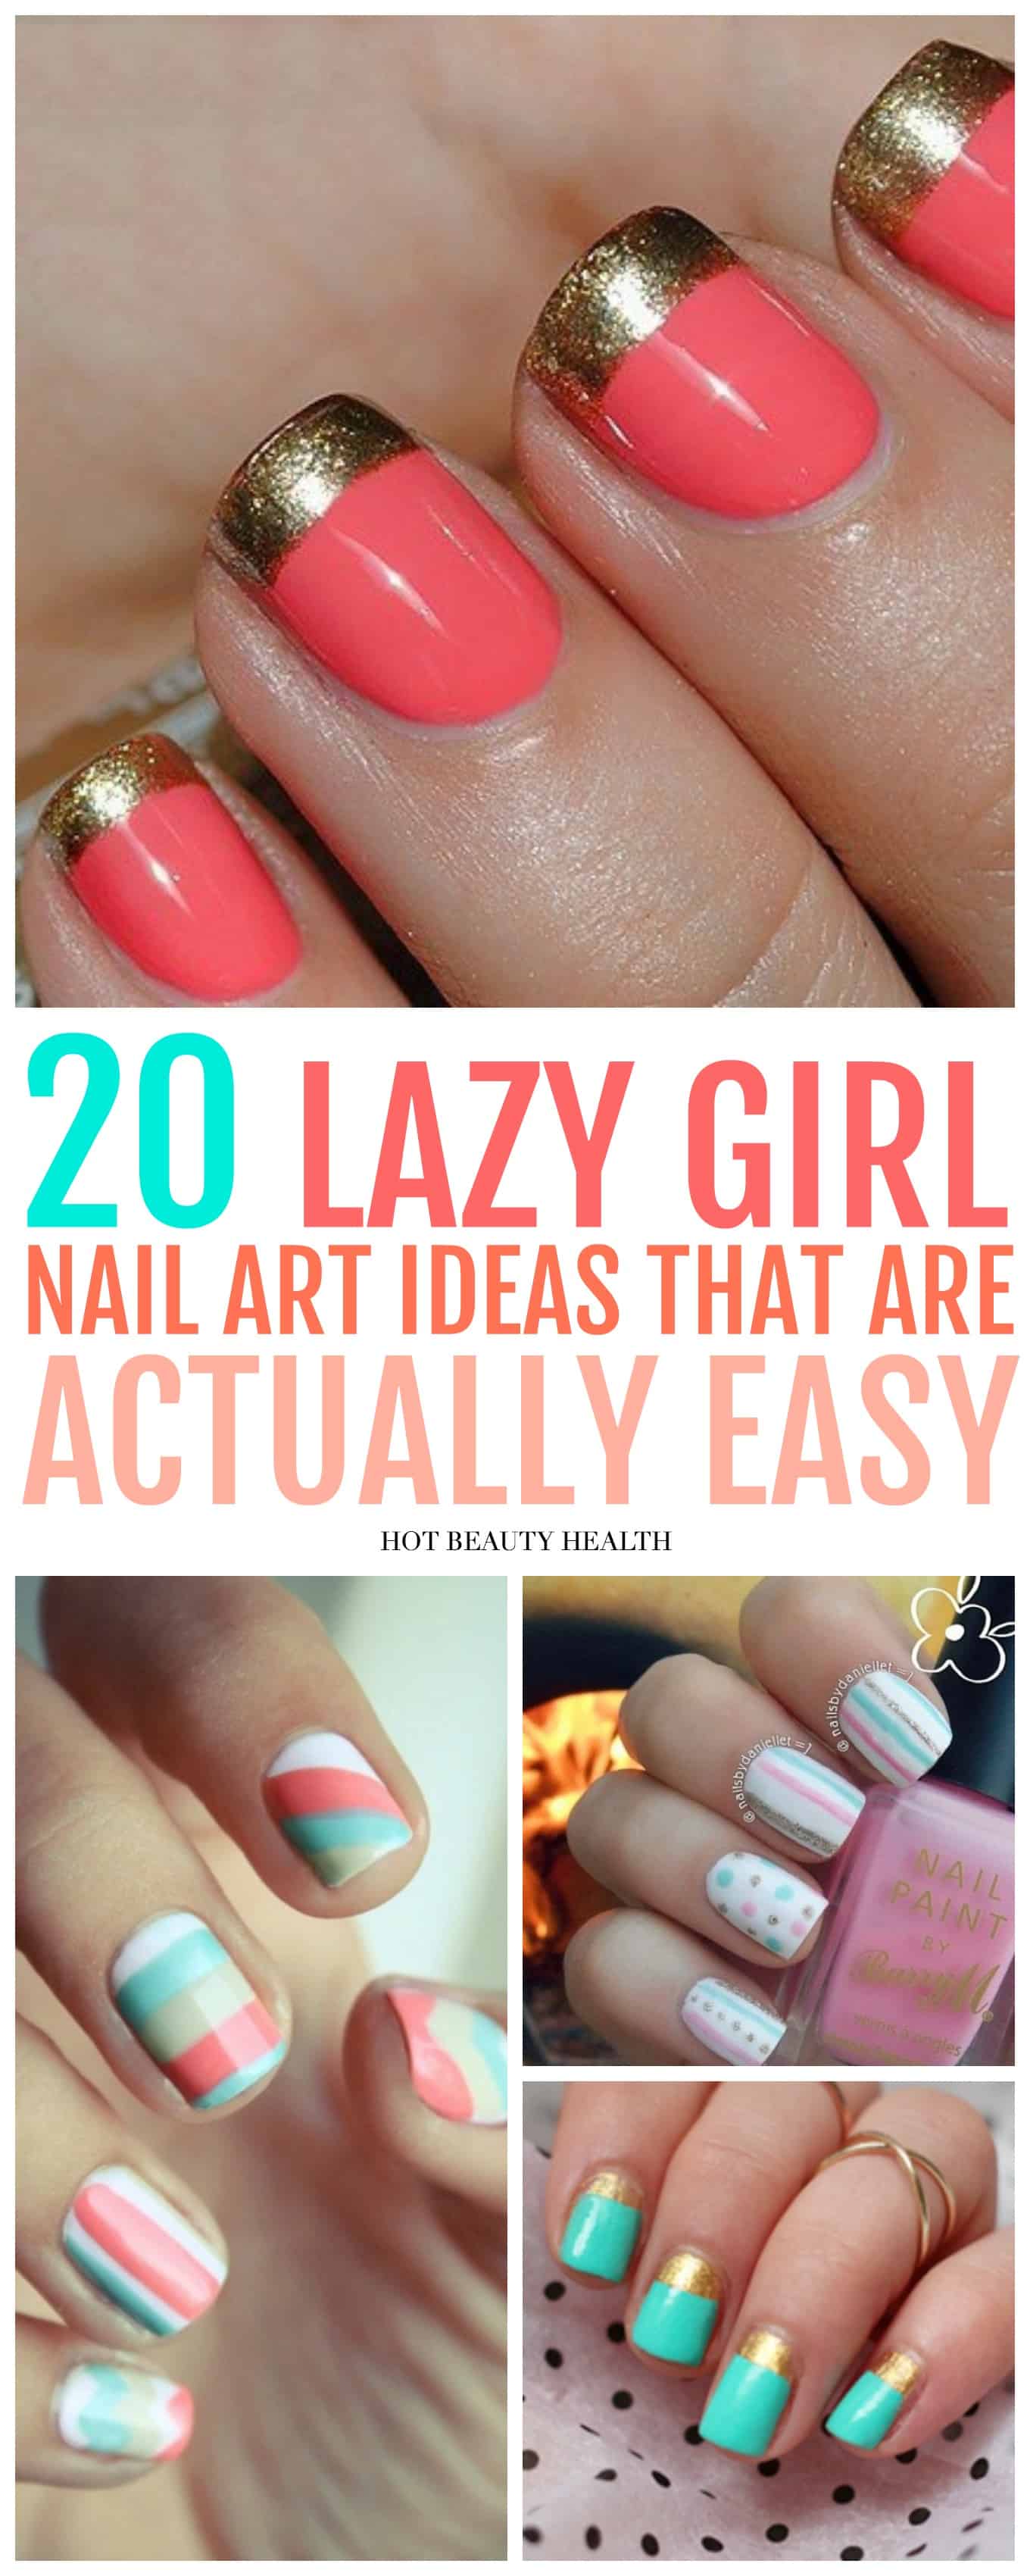 20 Adorable Toe Nail Designs for 2016 - Pretty Designs #ootd #nailart -  Urban Angels